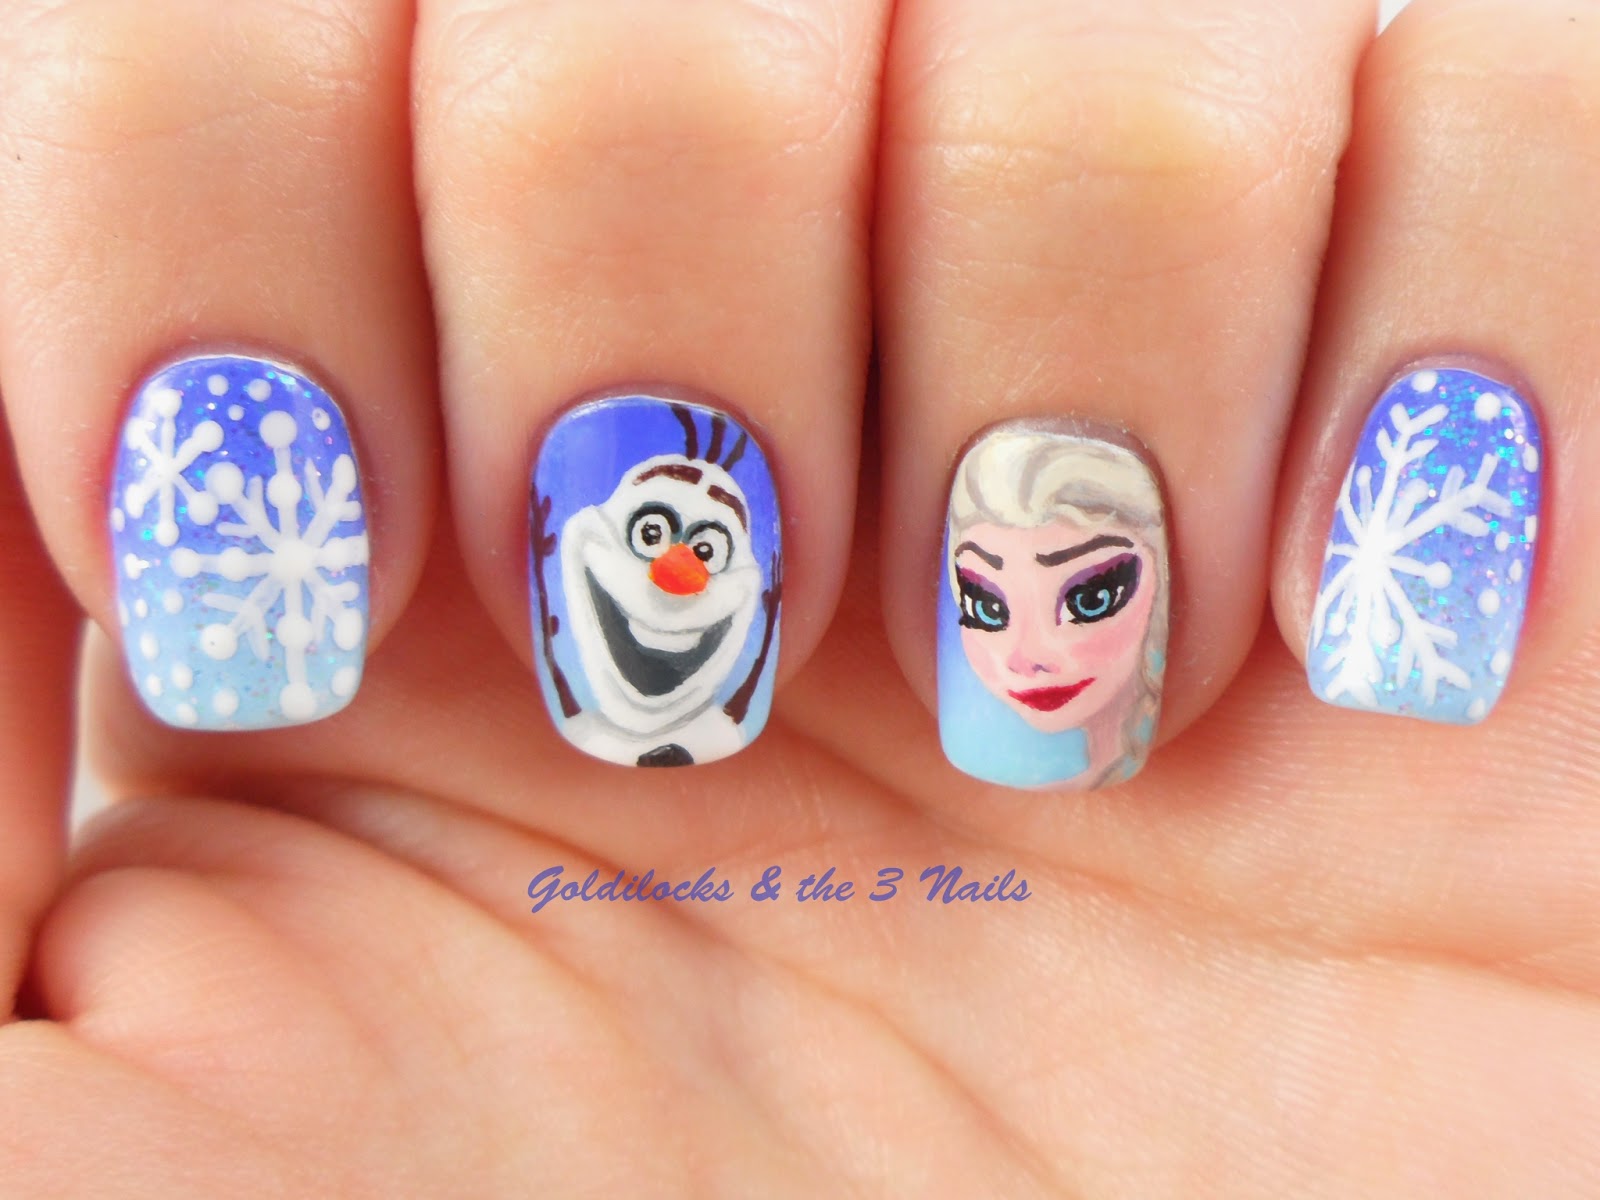 Goldilocks & the Three Nails: Do you want to build a snowman?